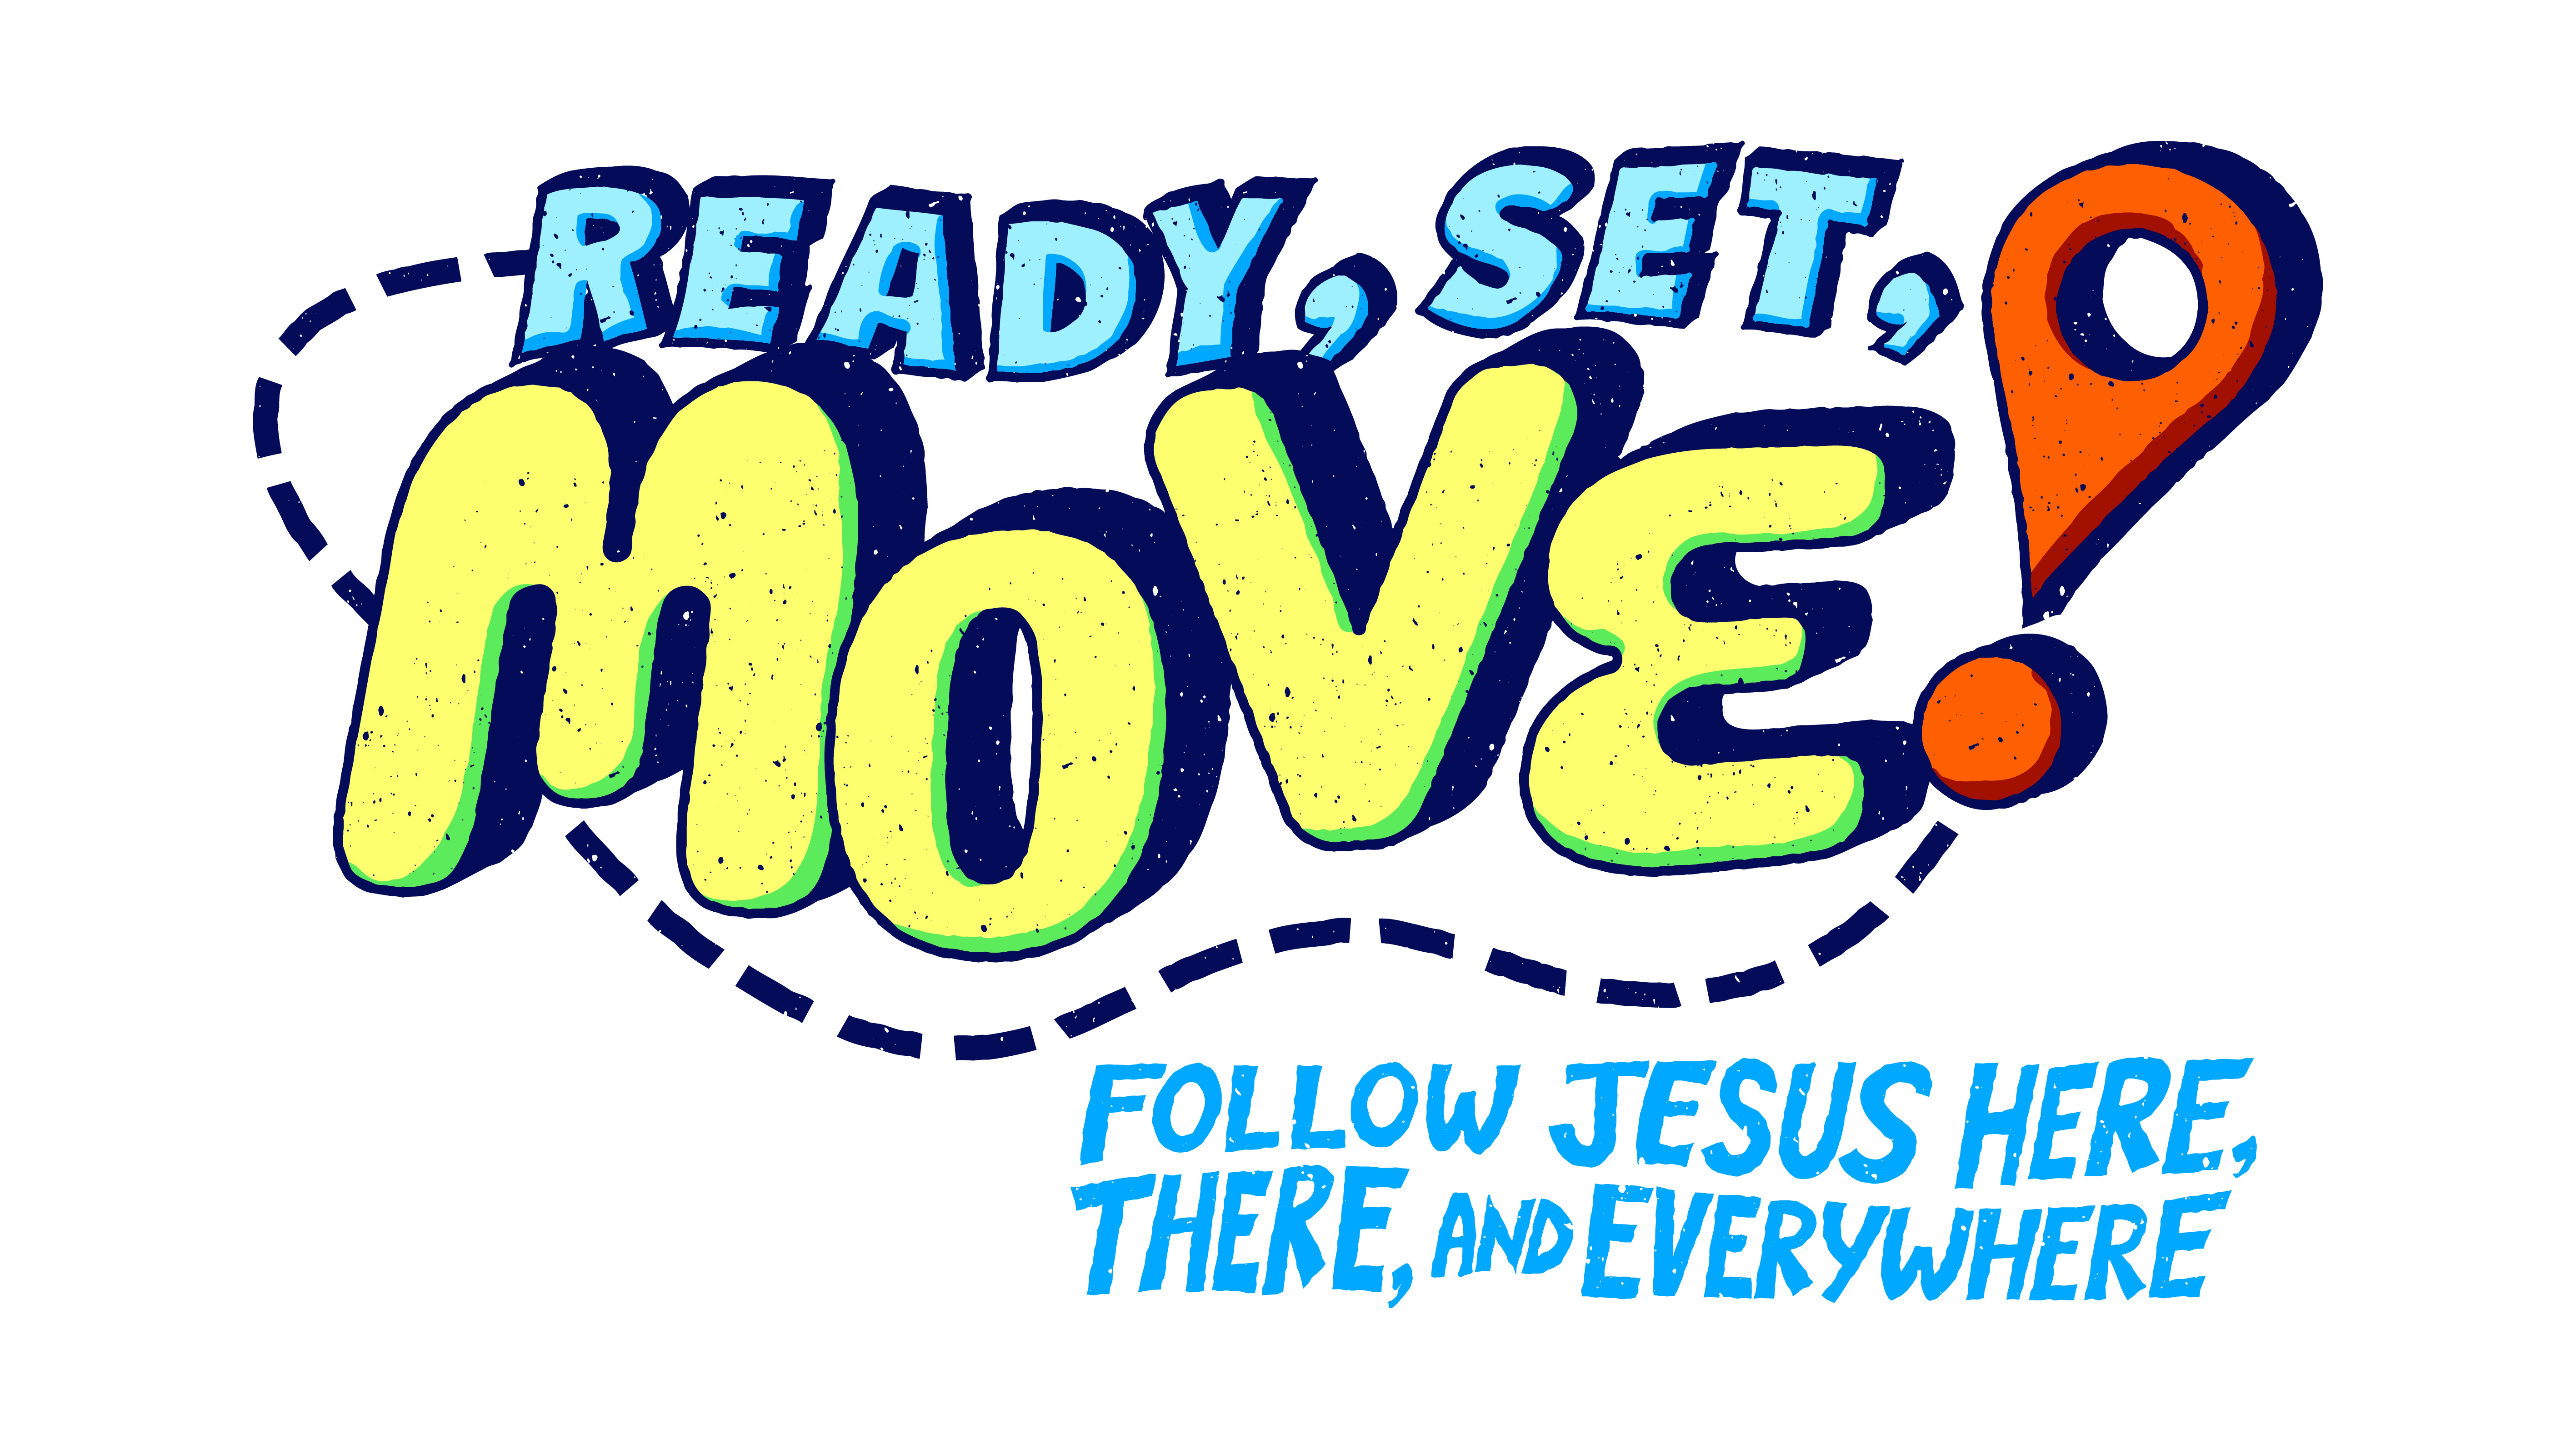 Ready, Set, Move! Follow Jesus Here, There, and Everywhere